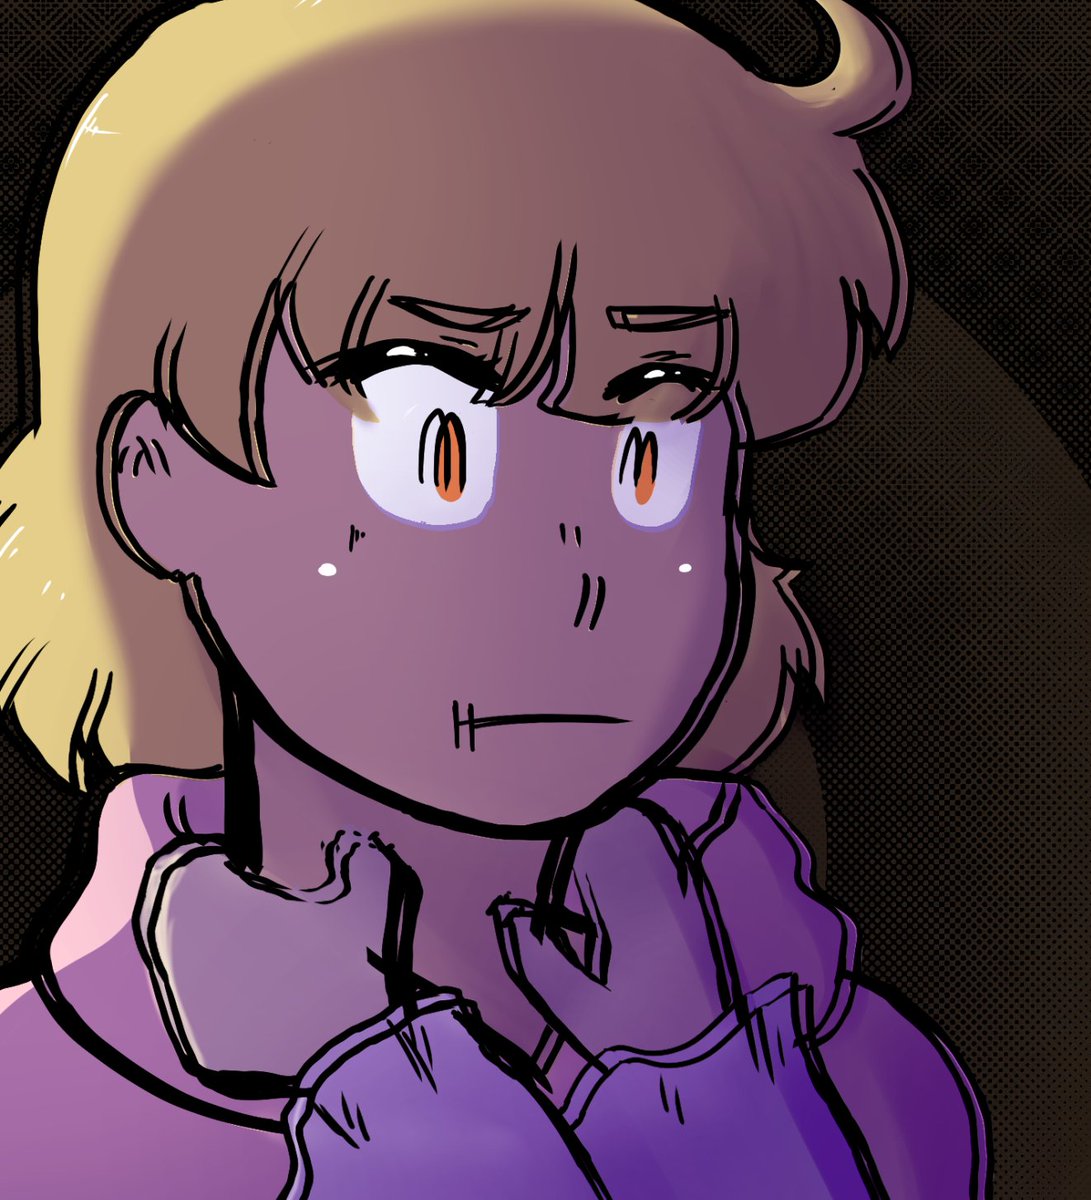 None of this is going as planned...
The new update is up on @webtooncanvas and @NamiComi ~

namicomi.com/en/chapter/xit…

webtoons.com/en/canvas/elem…

#WEBTOONCANVAS #WEBTONCANVASComic #WEBTOON #webcomic #NamiComi